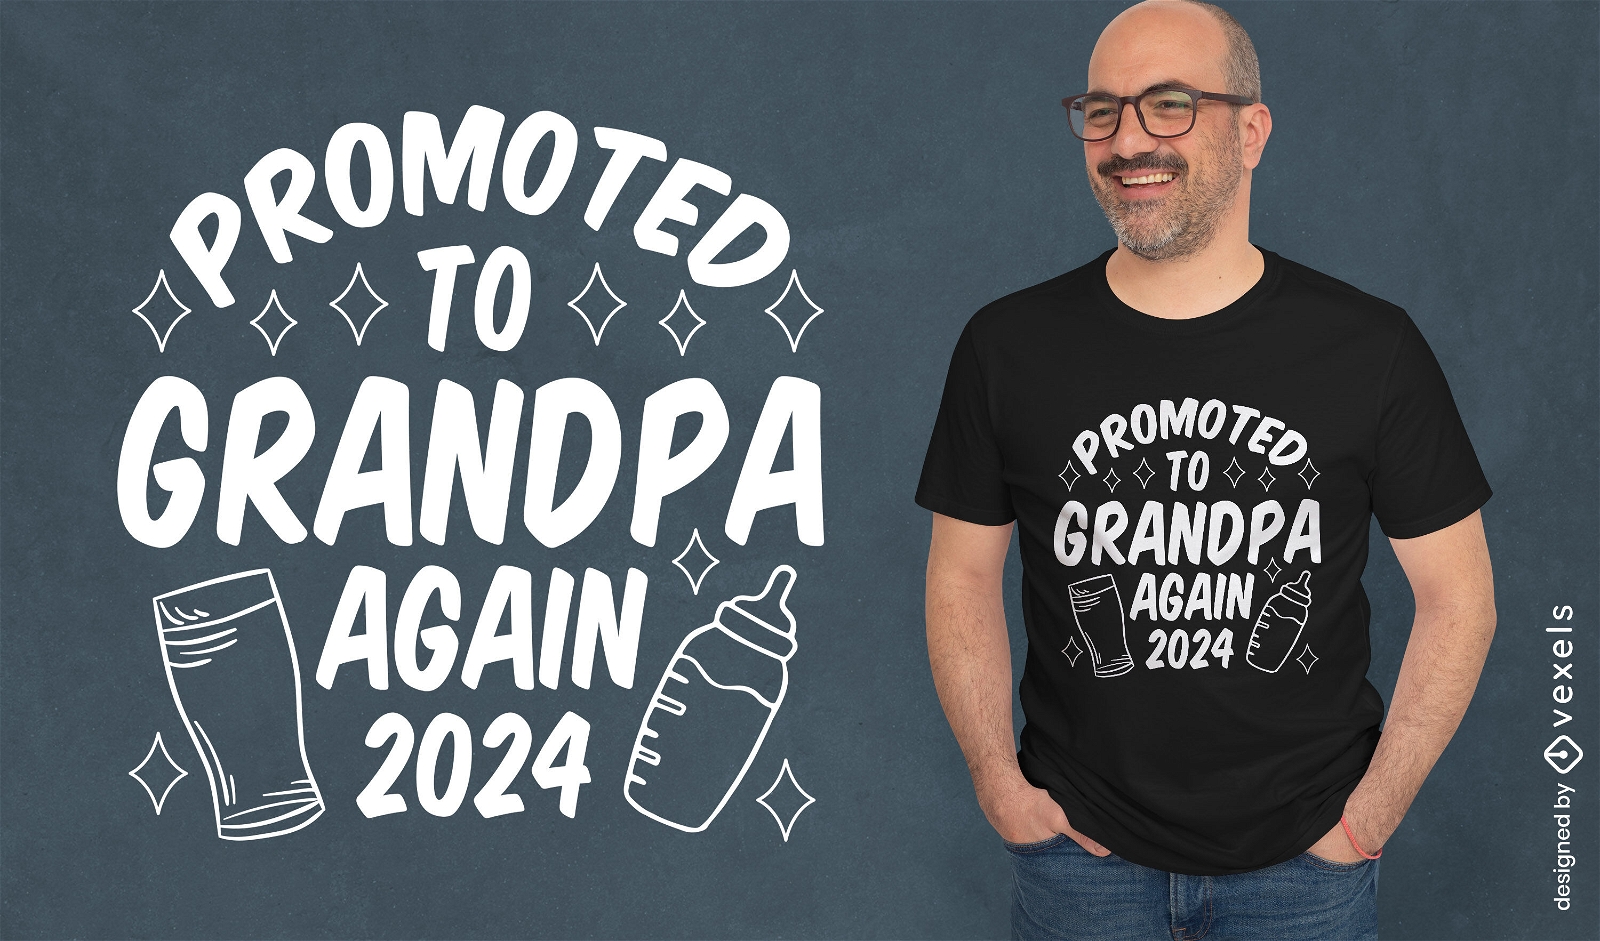 Promoted to grandpa again t-shirt design